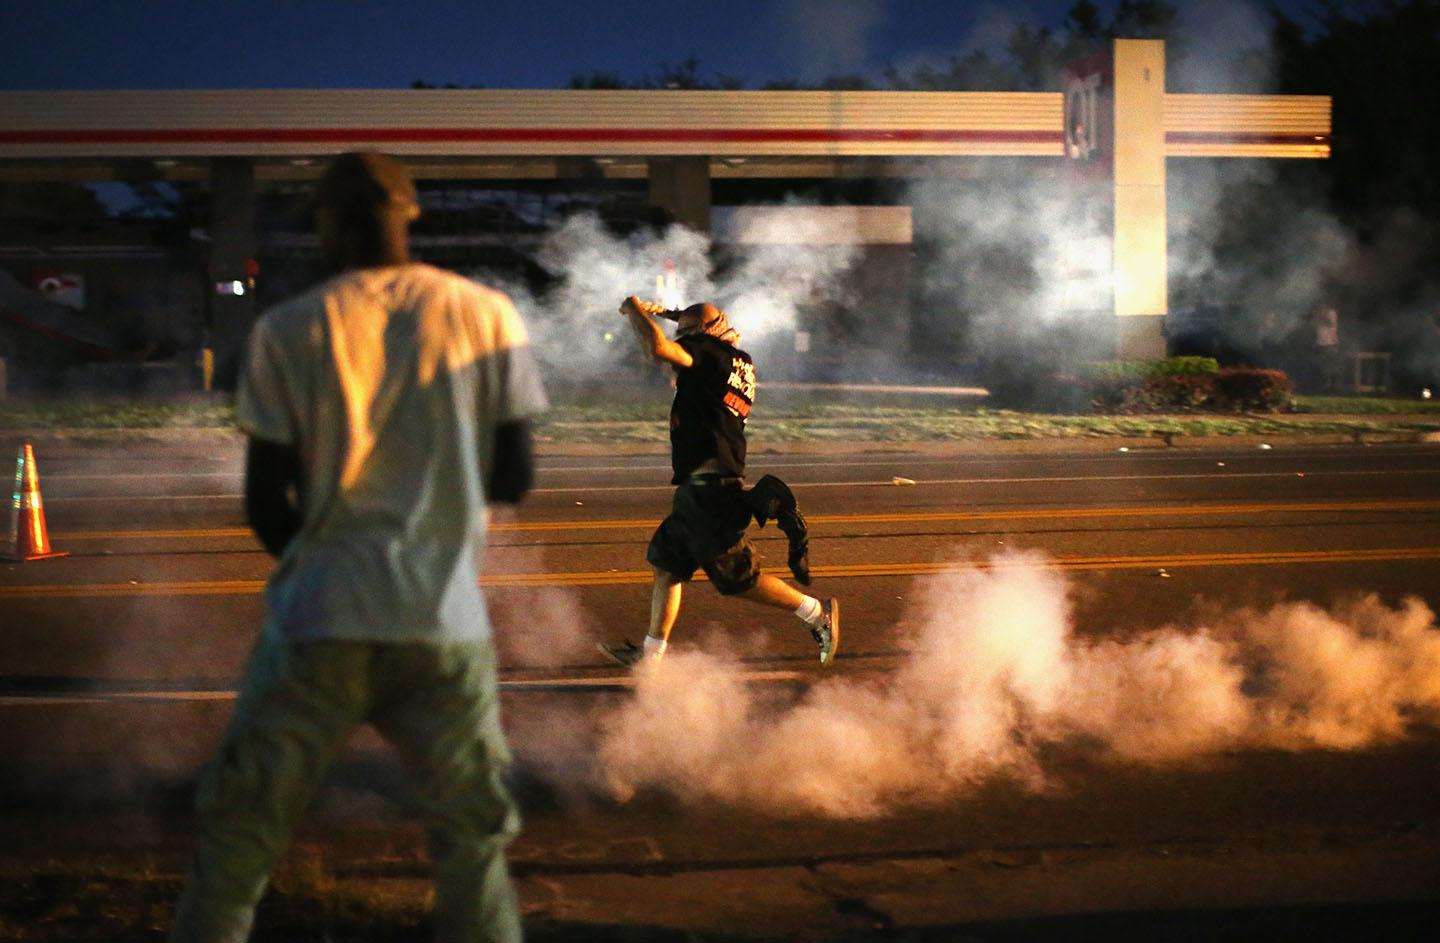 Demonstrators, protesting the shooting death of teenager Michael Brown, scramble for cover as police fire tear gas on August 13, 2014 in Ferguson, Missouri.